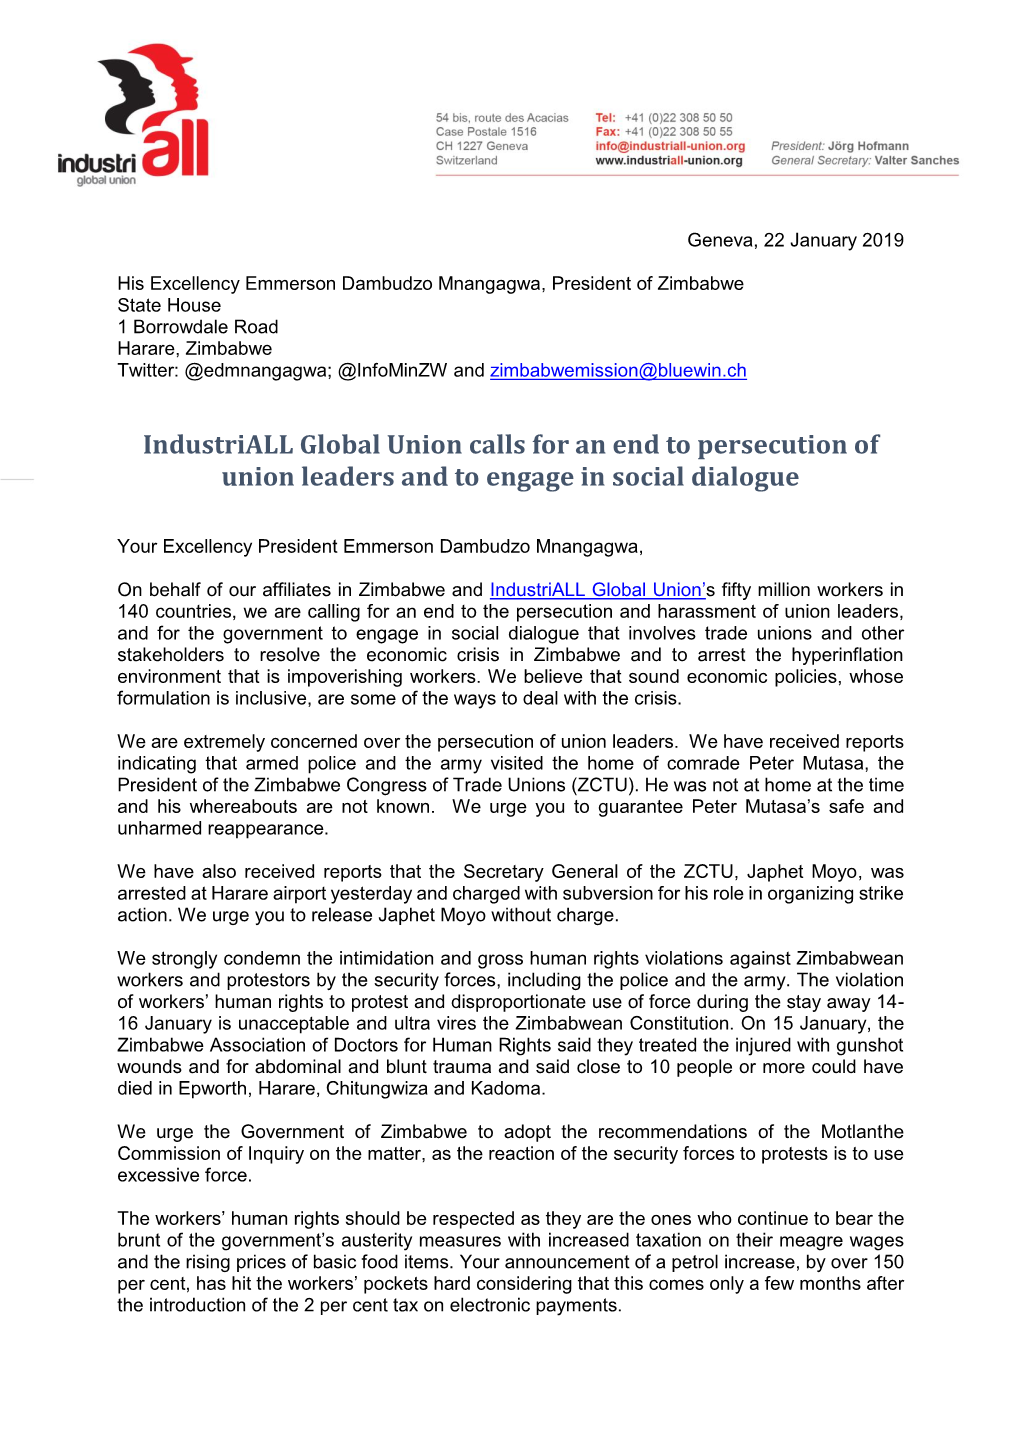 Industriall Letter to the President of Zimbabwe